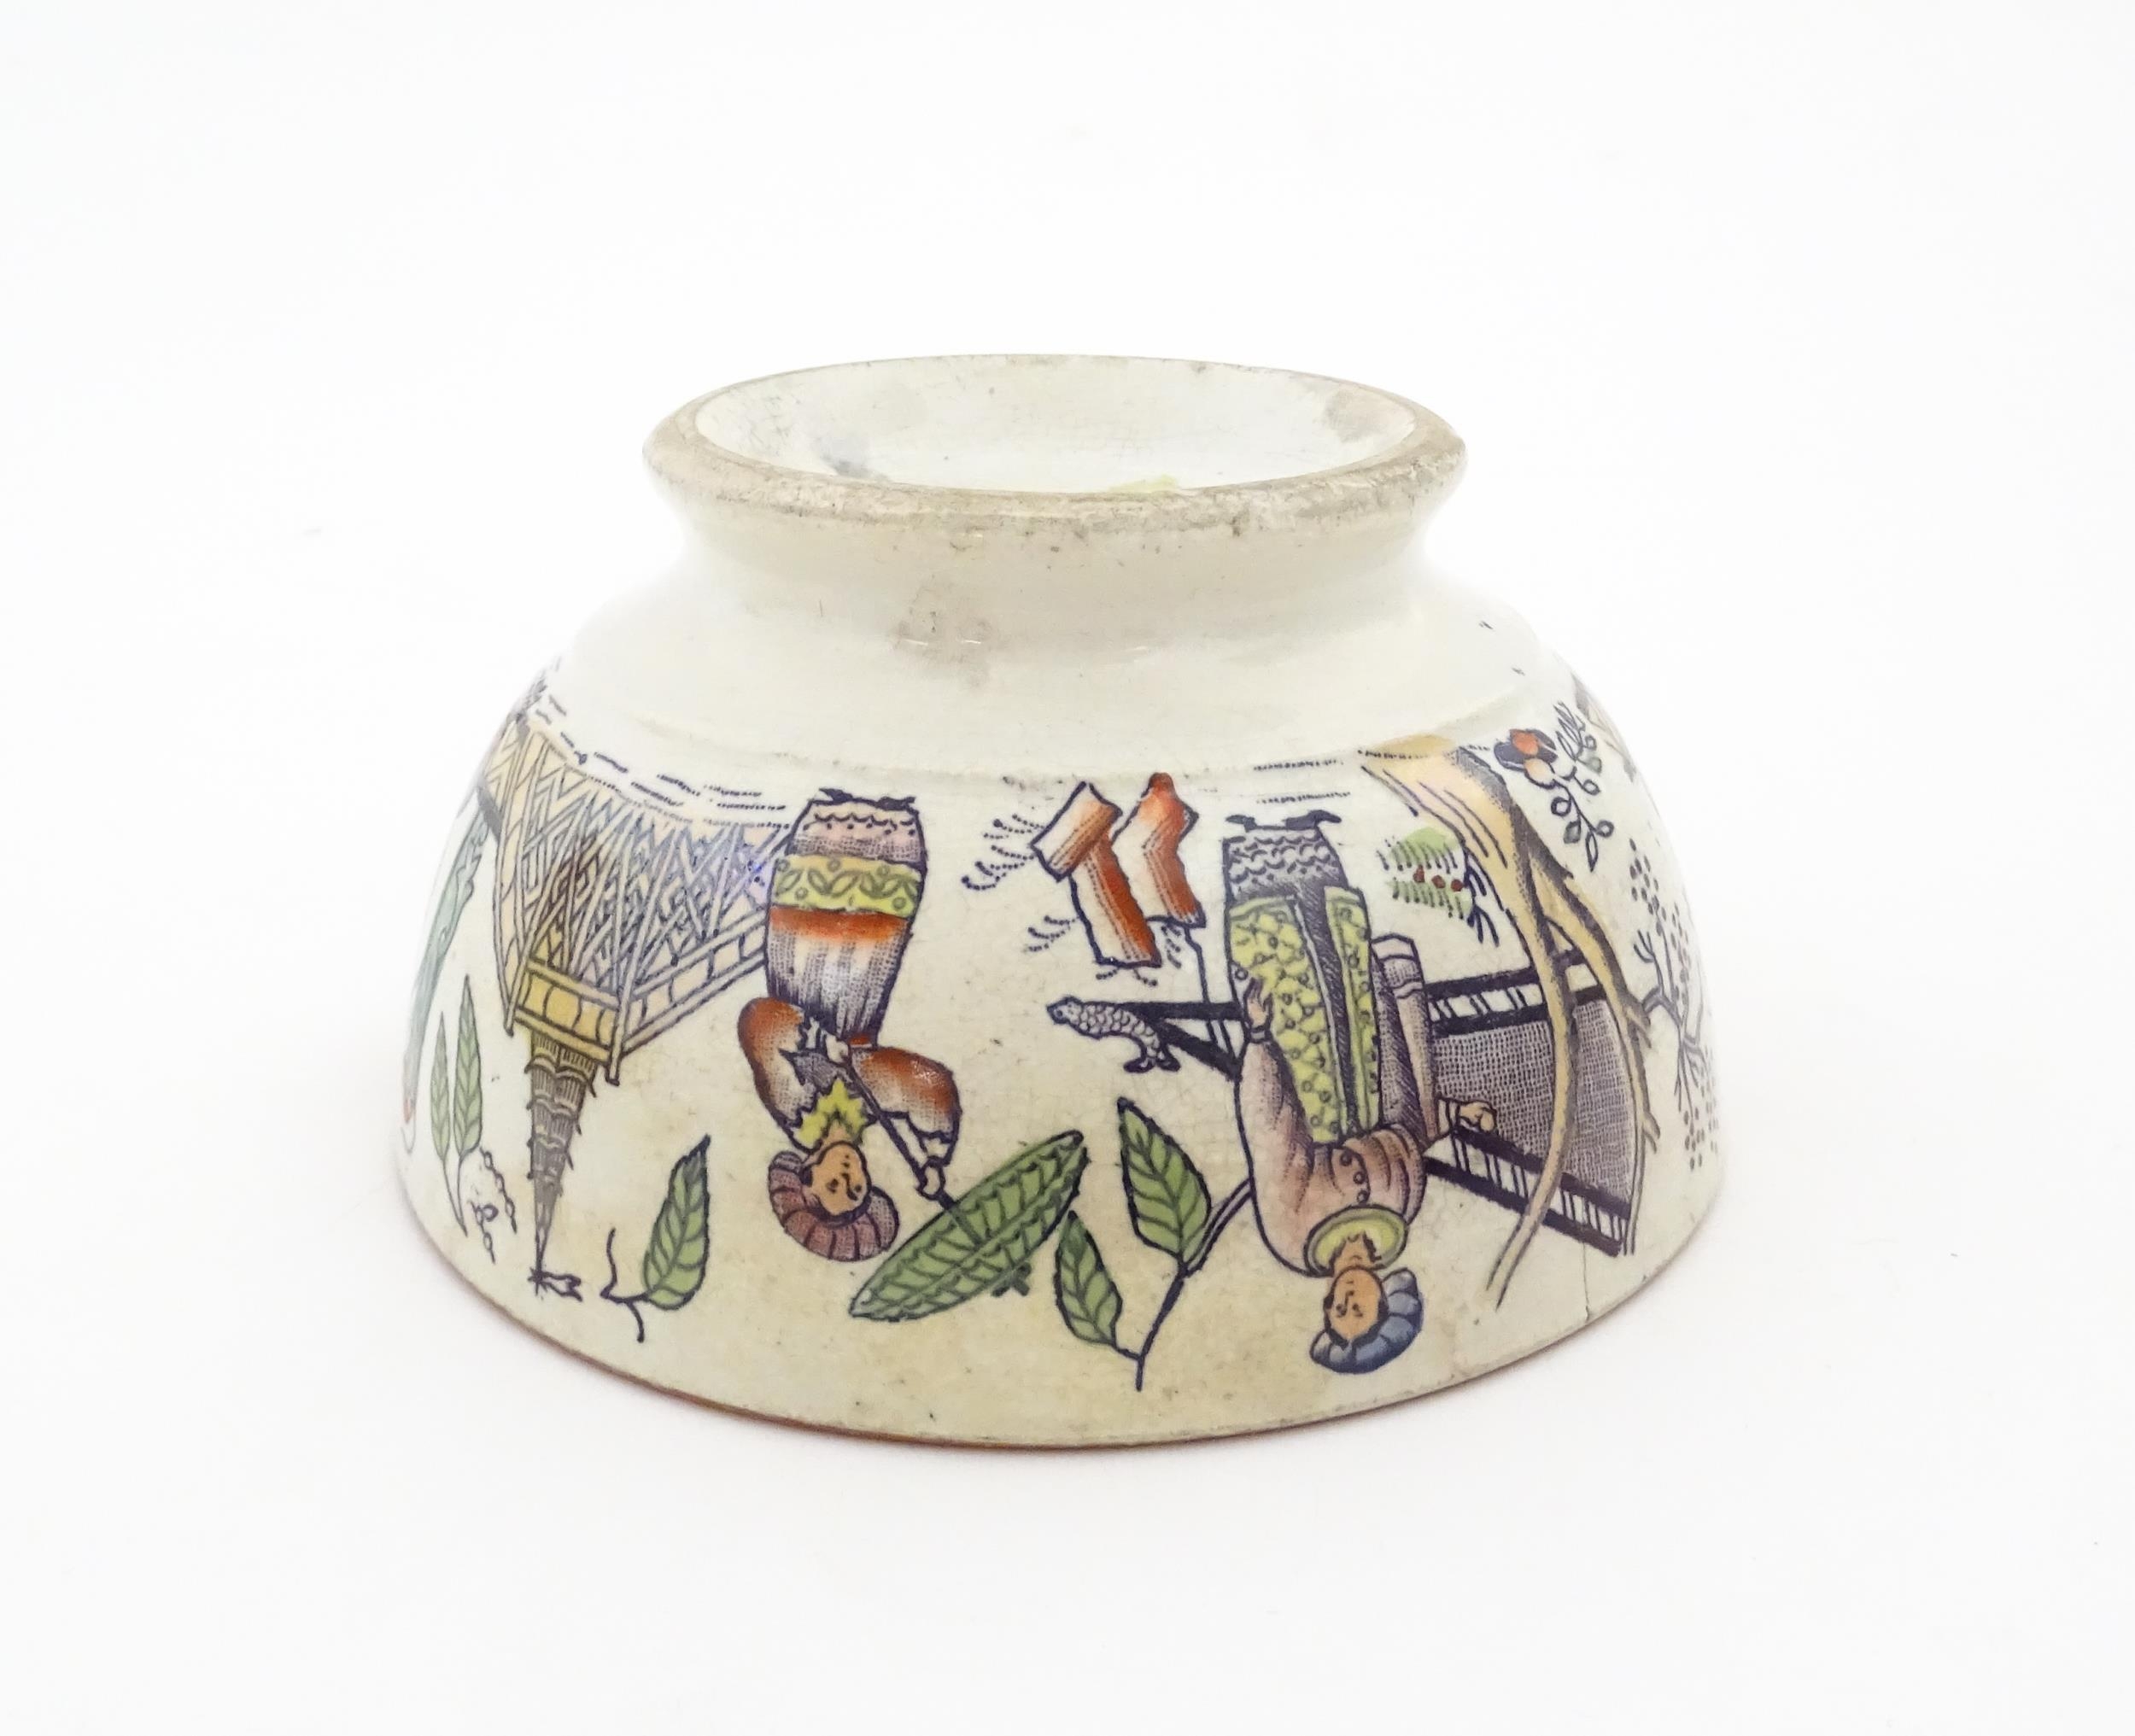 A Scottish bowl with Chinoiserie depicting figures in a landscape. Possibly Bell's Pottery. - Image 8 of 11